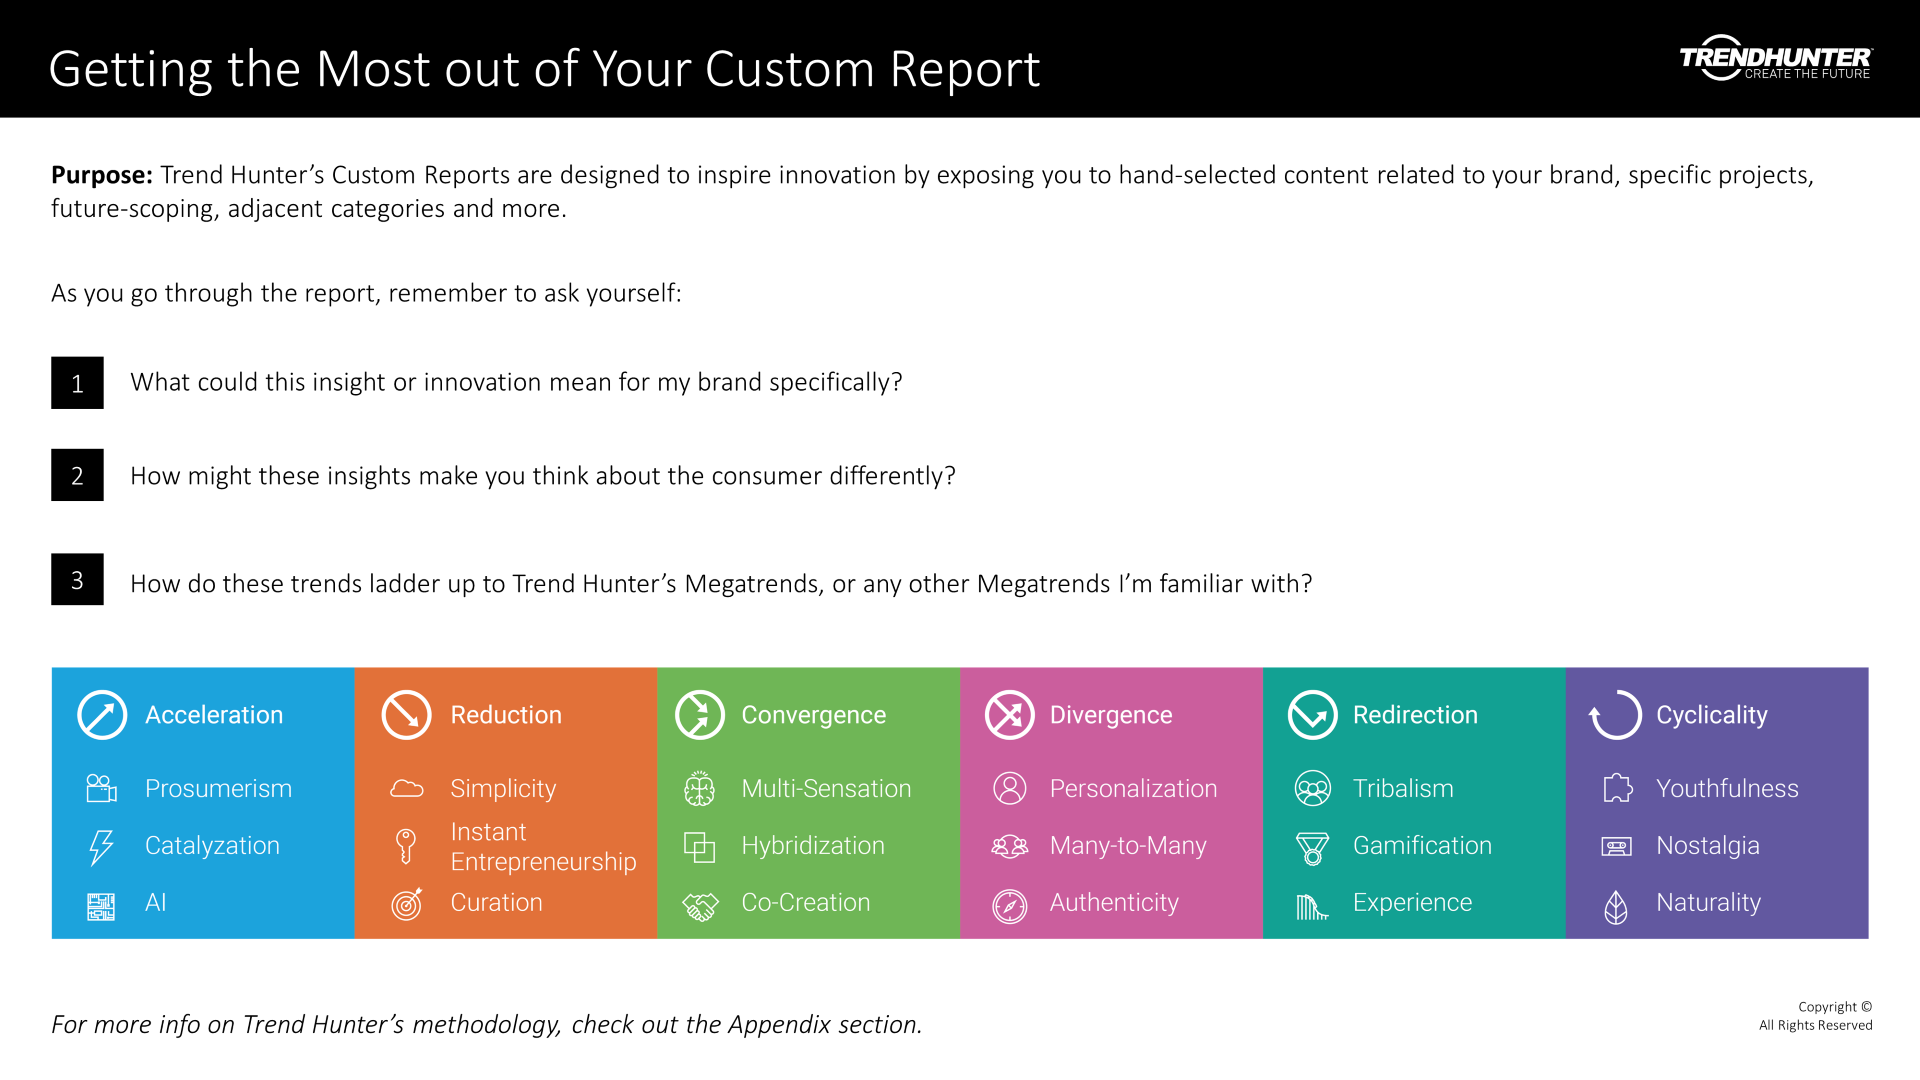 Image Slide: Getting the most out of your custom report